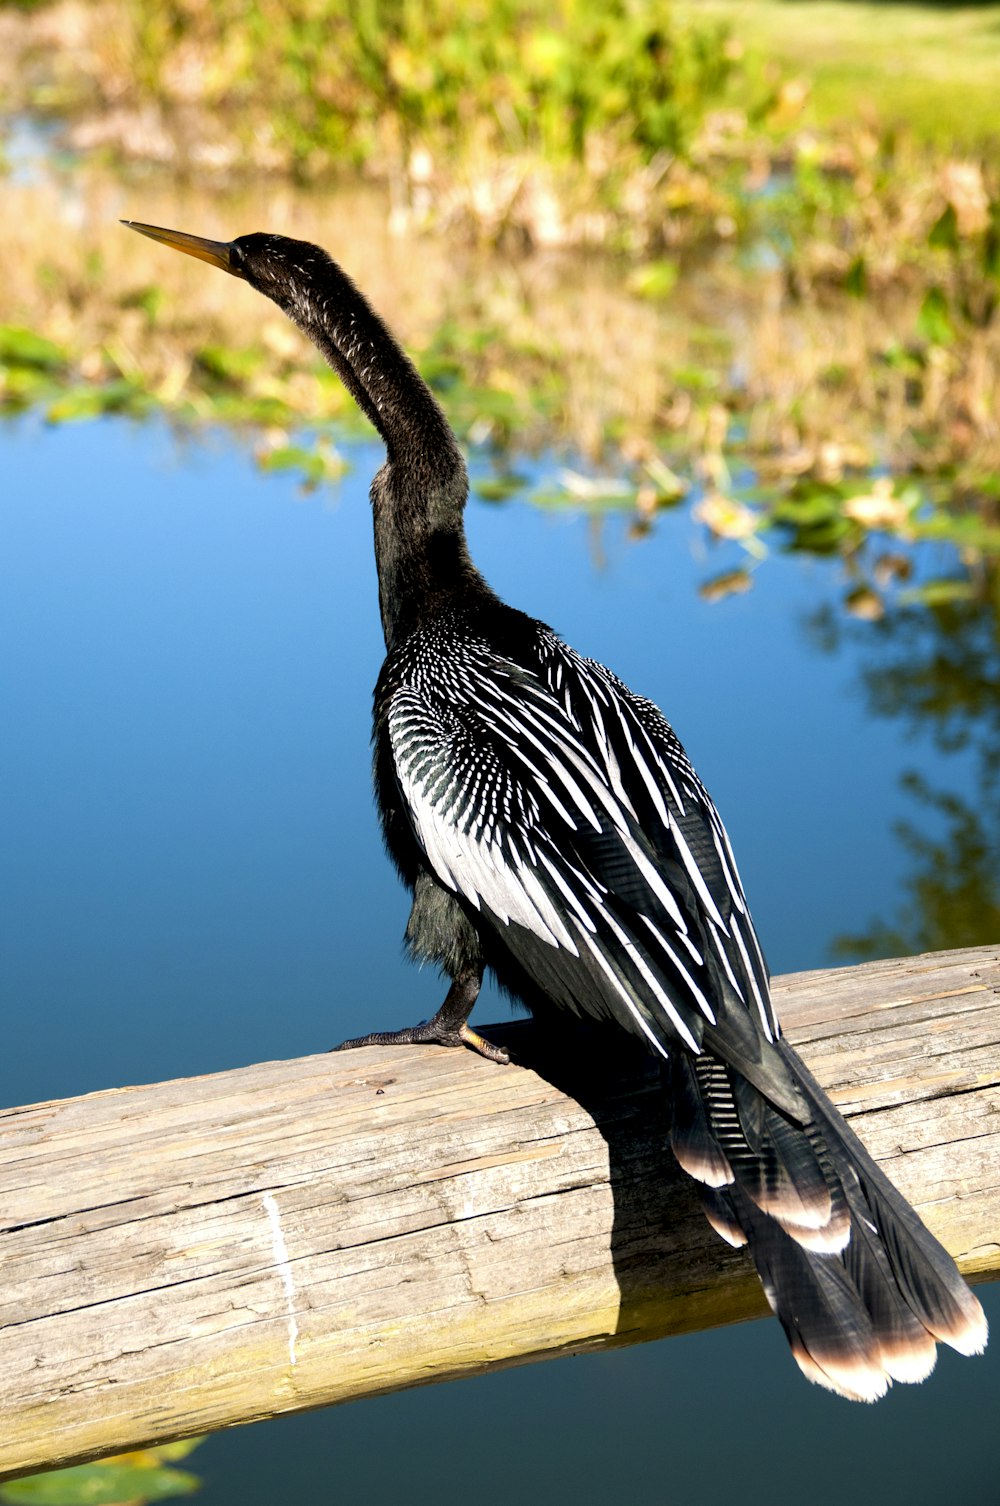 a bird sitting on a wooden rail near a body of water